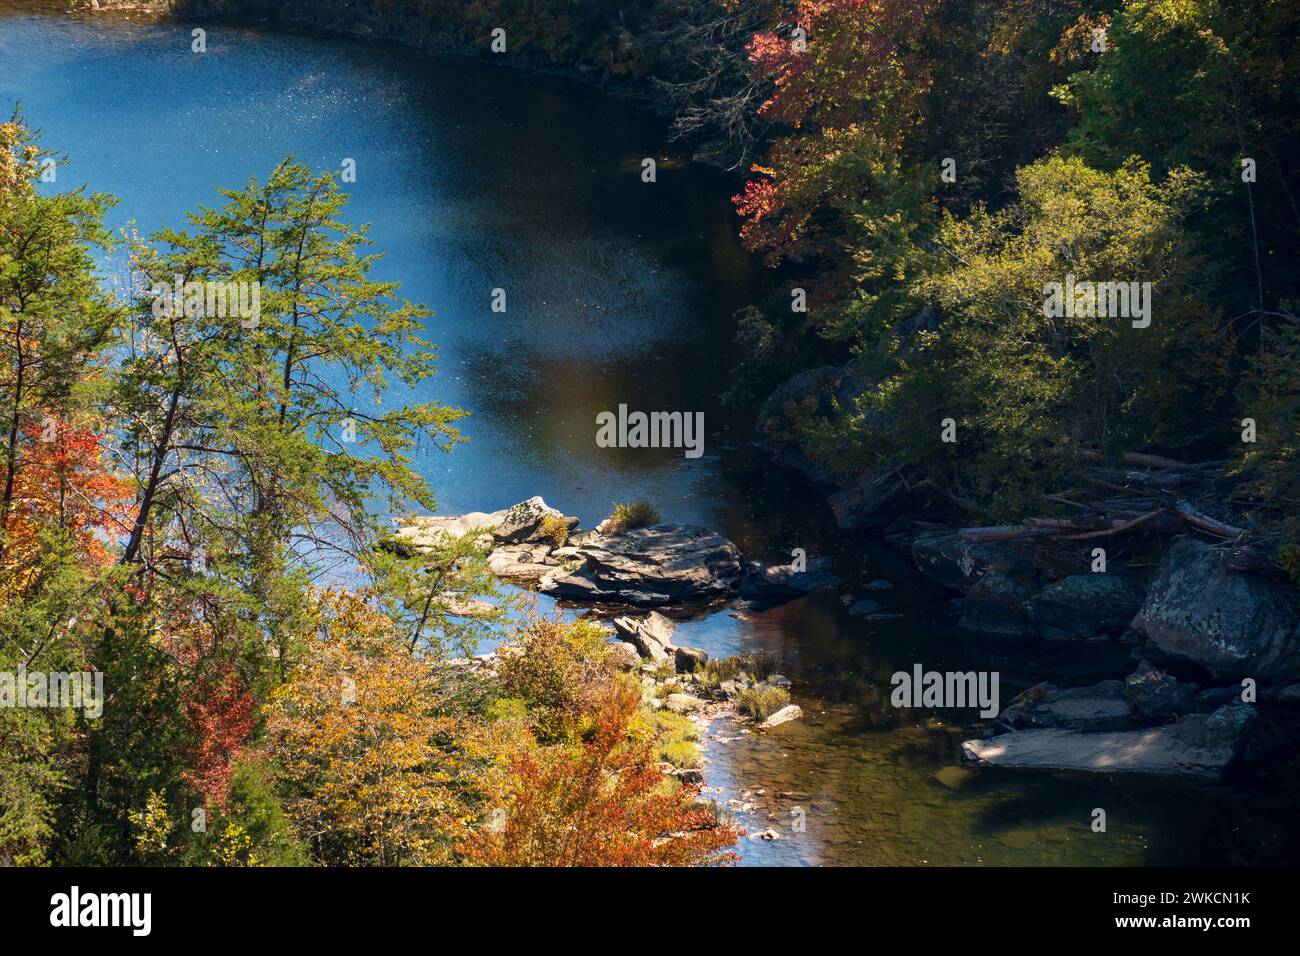 The Obed Wild & Scenic River in the Cumberland Plateau in Tennessee Stock Photo